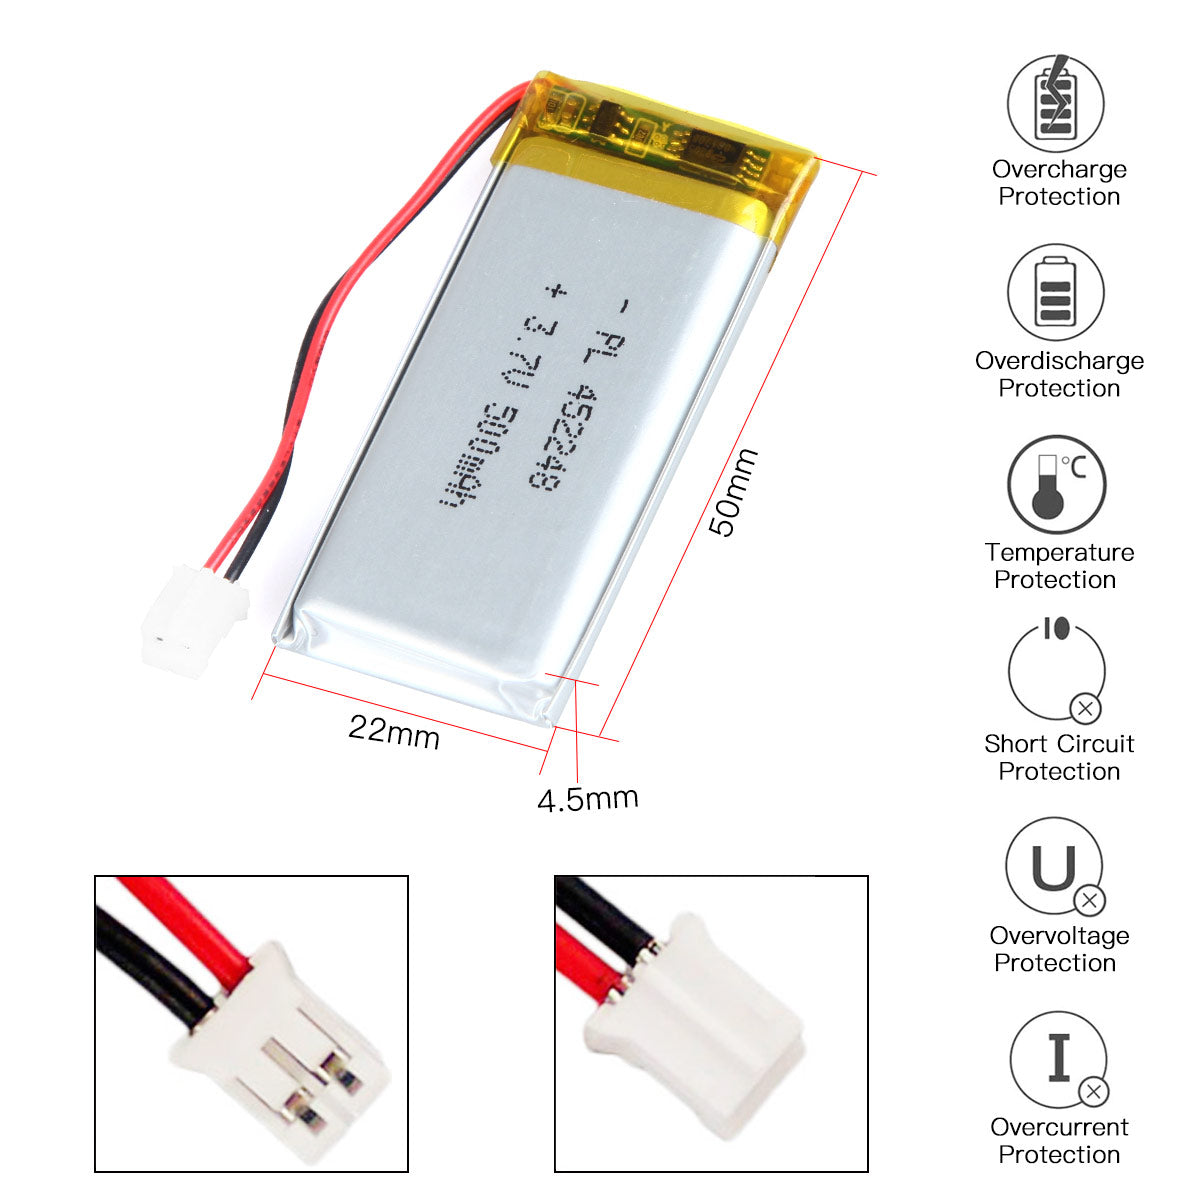 YDL 3.7V 500mAh 452248 Rechargeable Lithium Polymer Battery Length 50mm